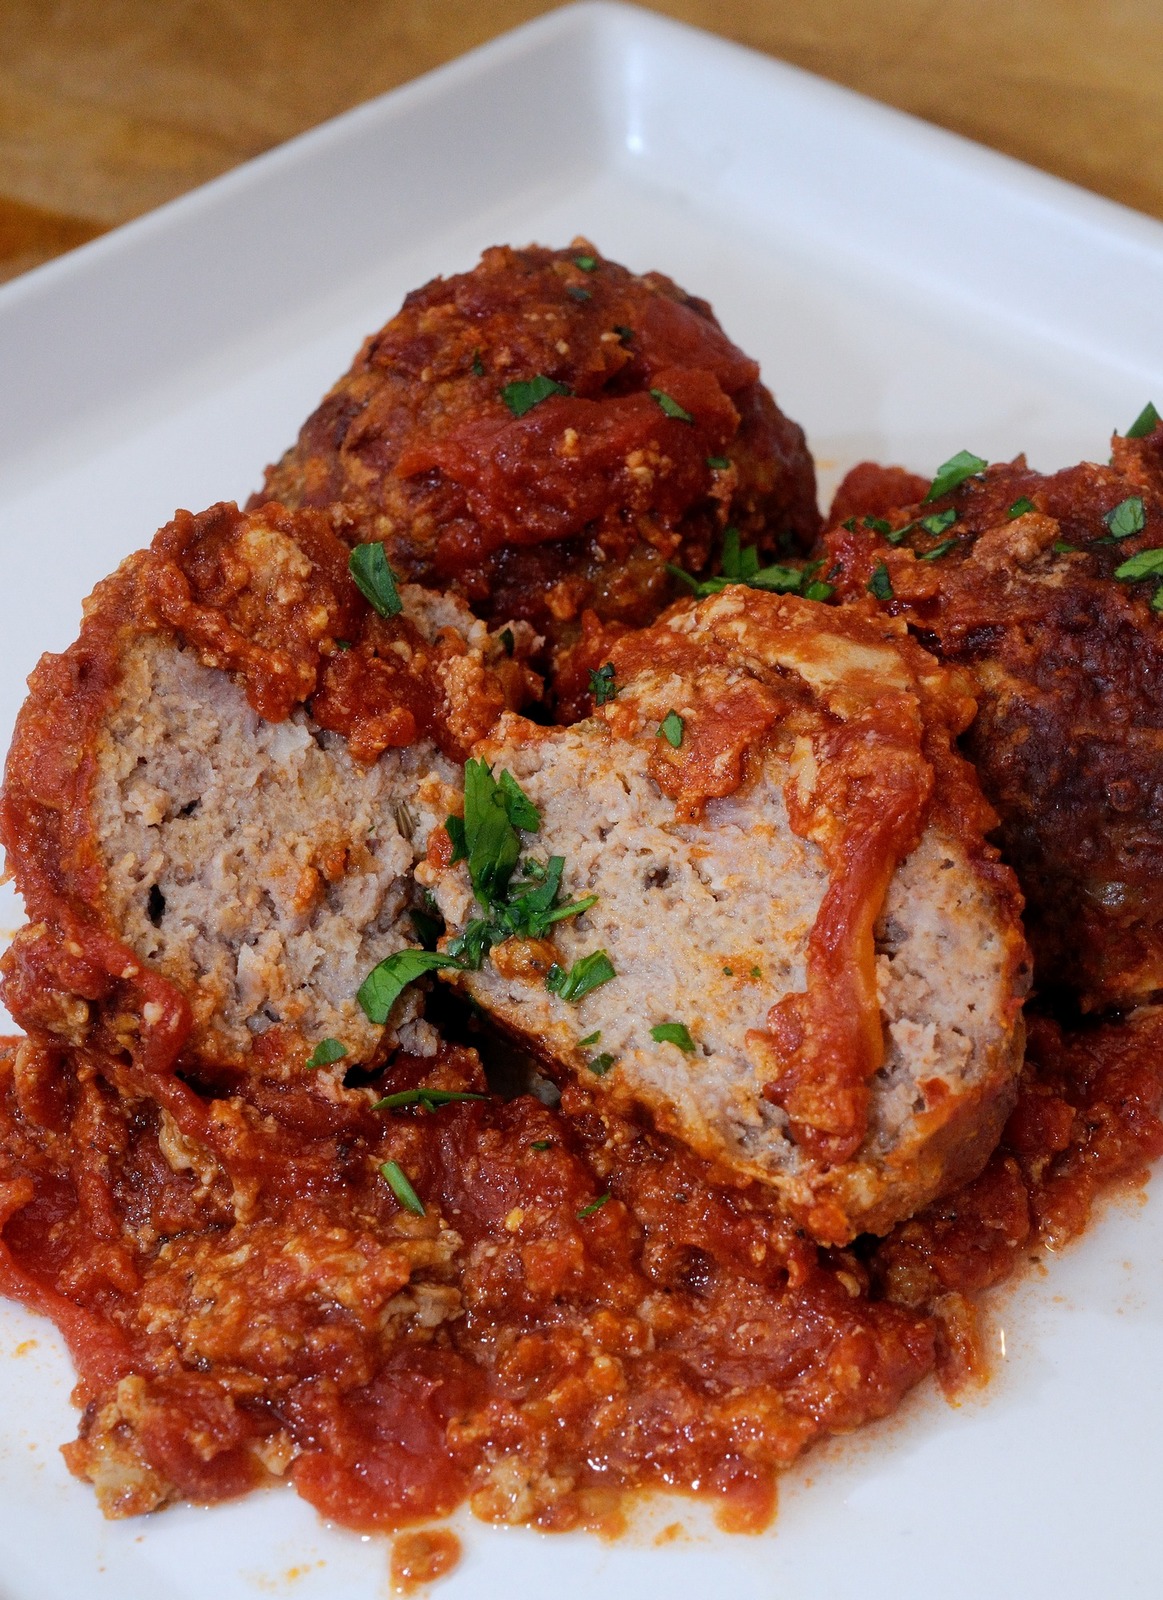 Meatballs Cooked in Tomato Sauce